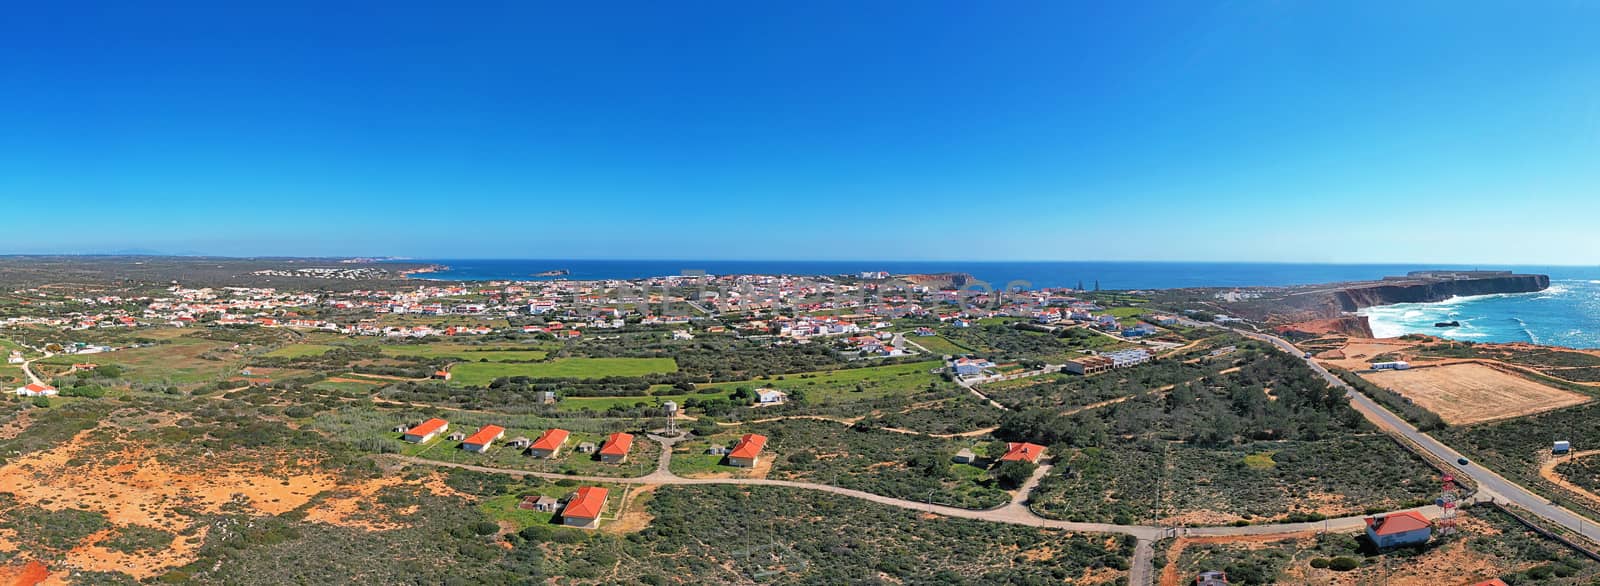 Aerial panorama from the vilage Sagres in the Algarve Portugal by devy